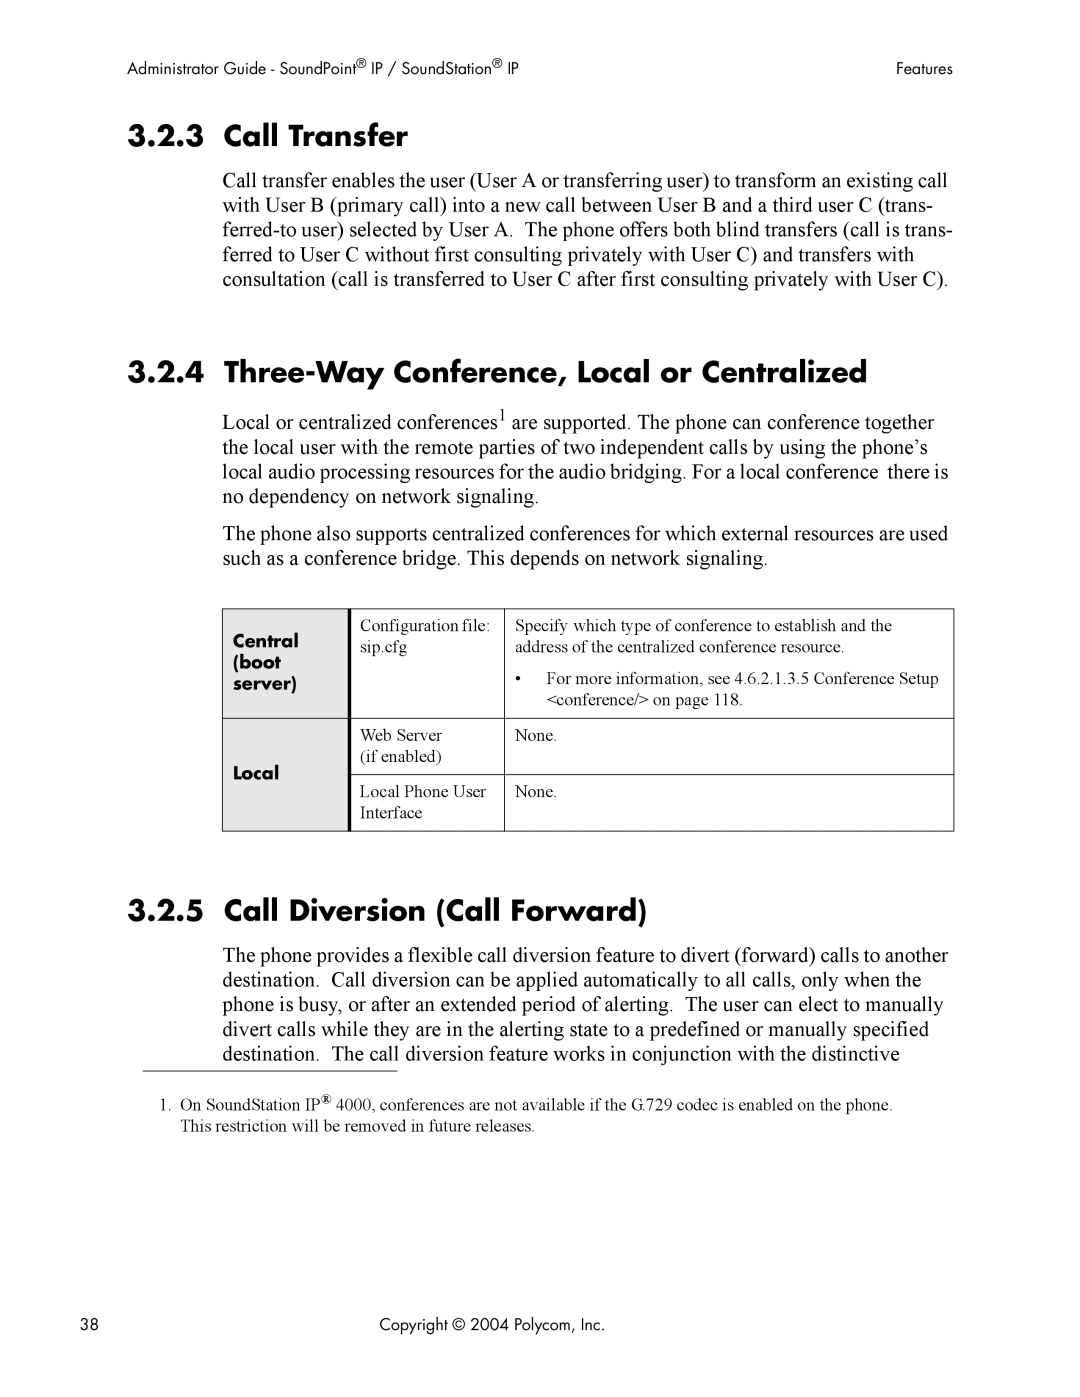 Polycom Version 1.4.x 17 manual Call Transfer, Three-Way Conference, Local or Centralized, Call Diversion Call Forward 